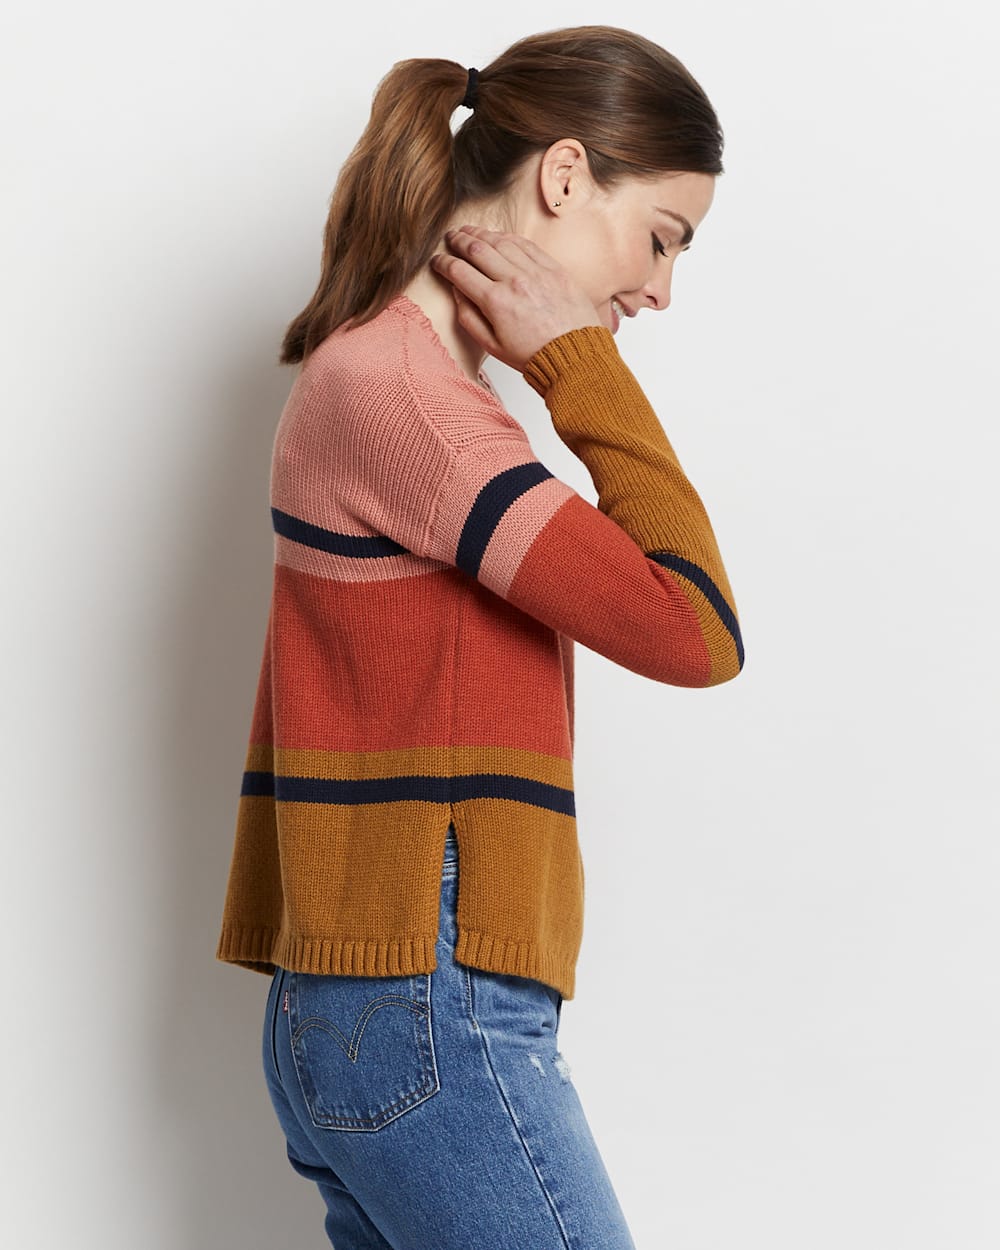 ALTERNATE VIEW OF WOMEN'S RELAXED-FIT STRIPE PULLOVER IN PEANUT/CORAL MULTI image number 3